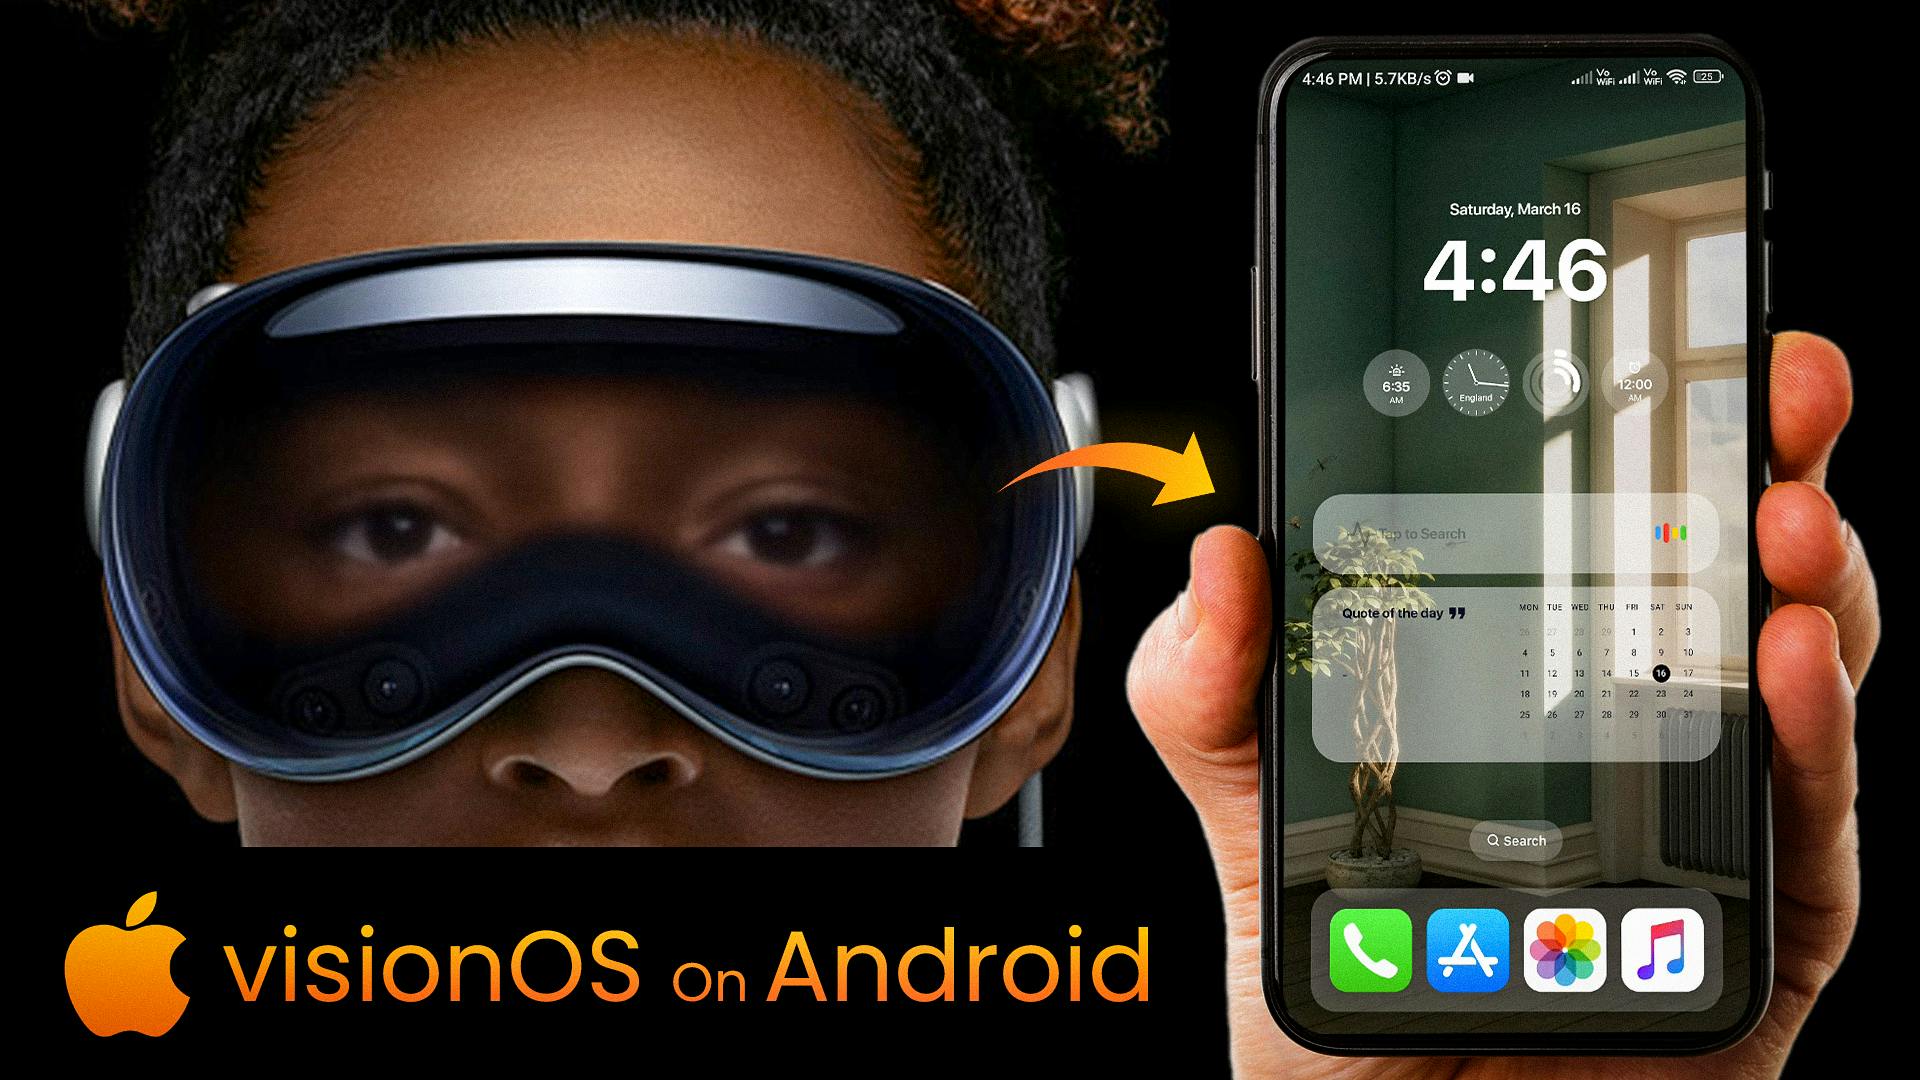 Here’s How To Install visionOS On Any Android Phone